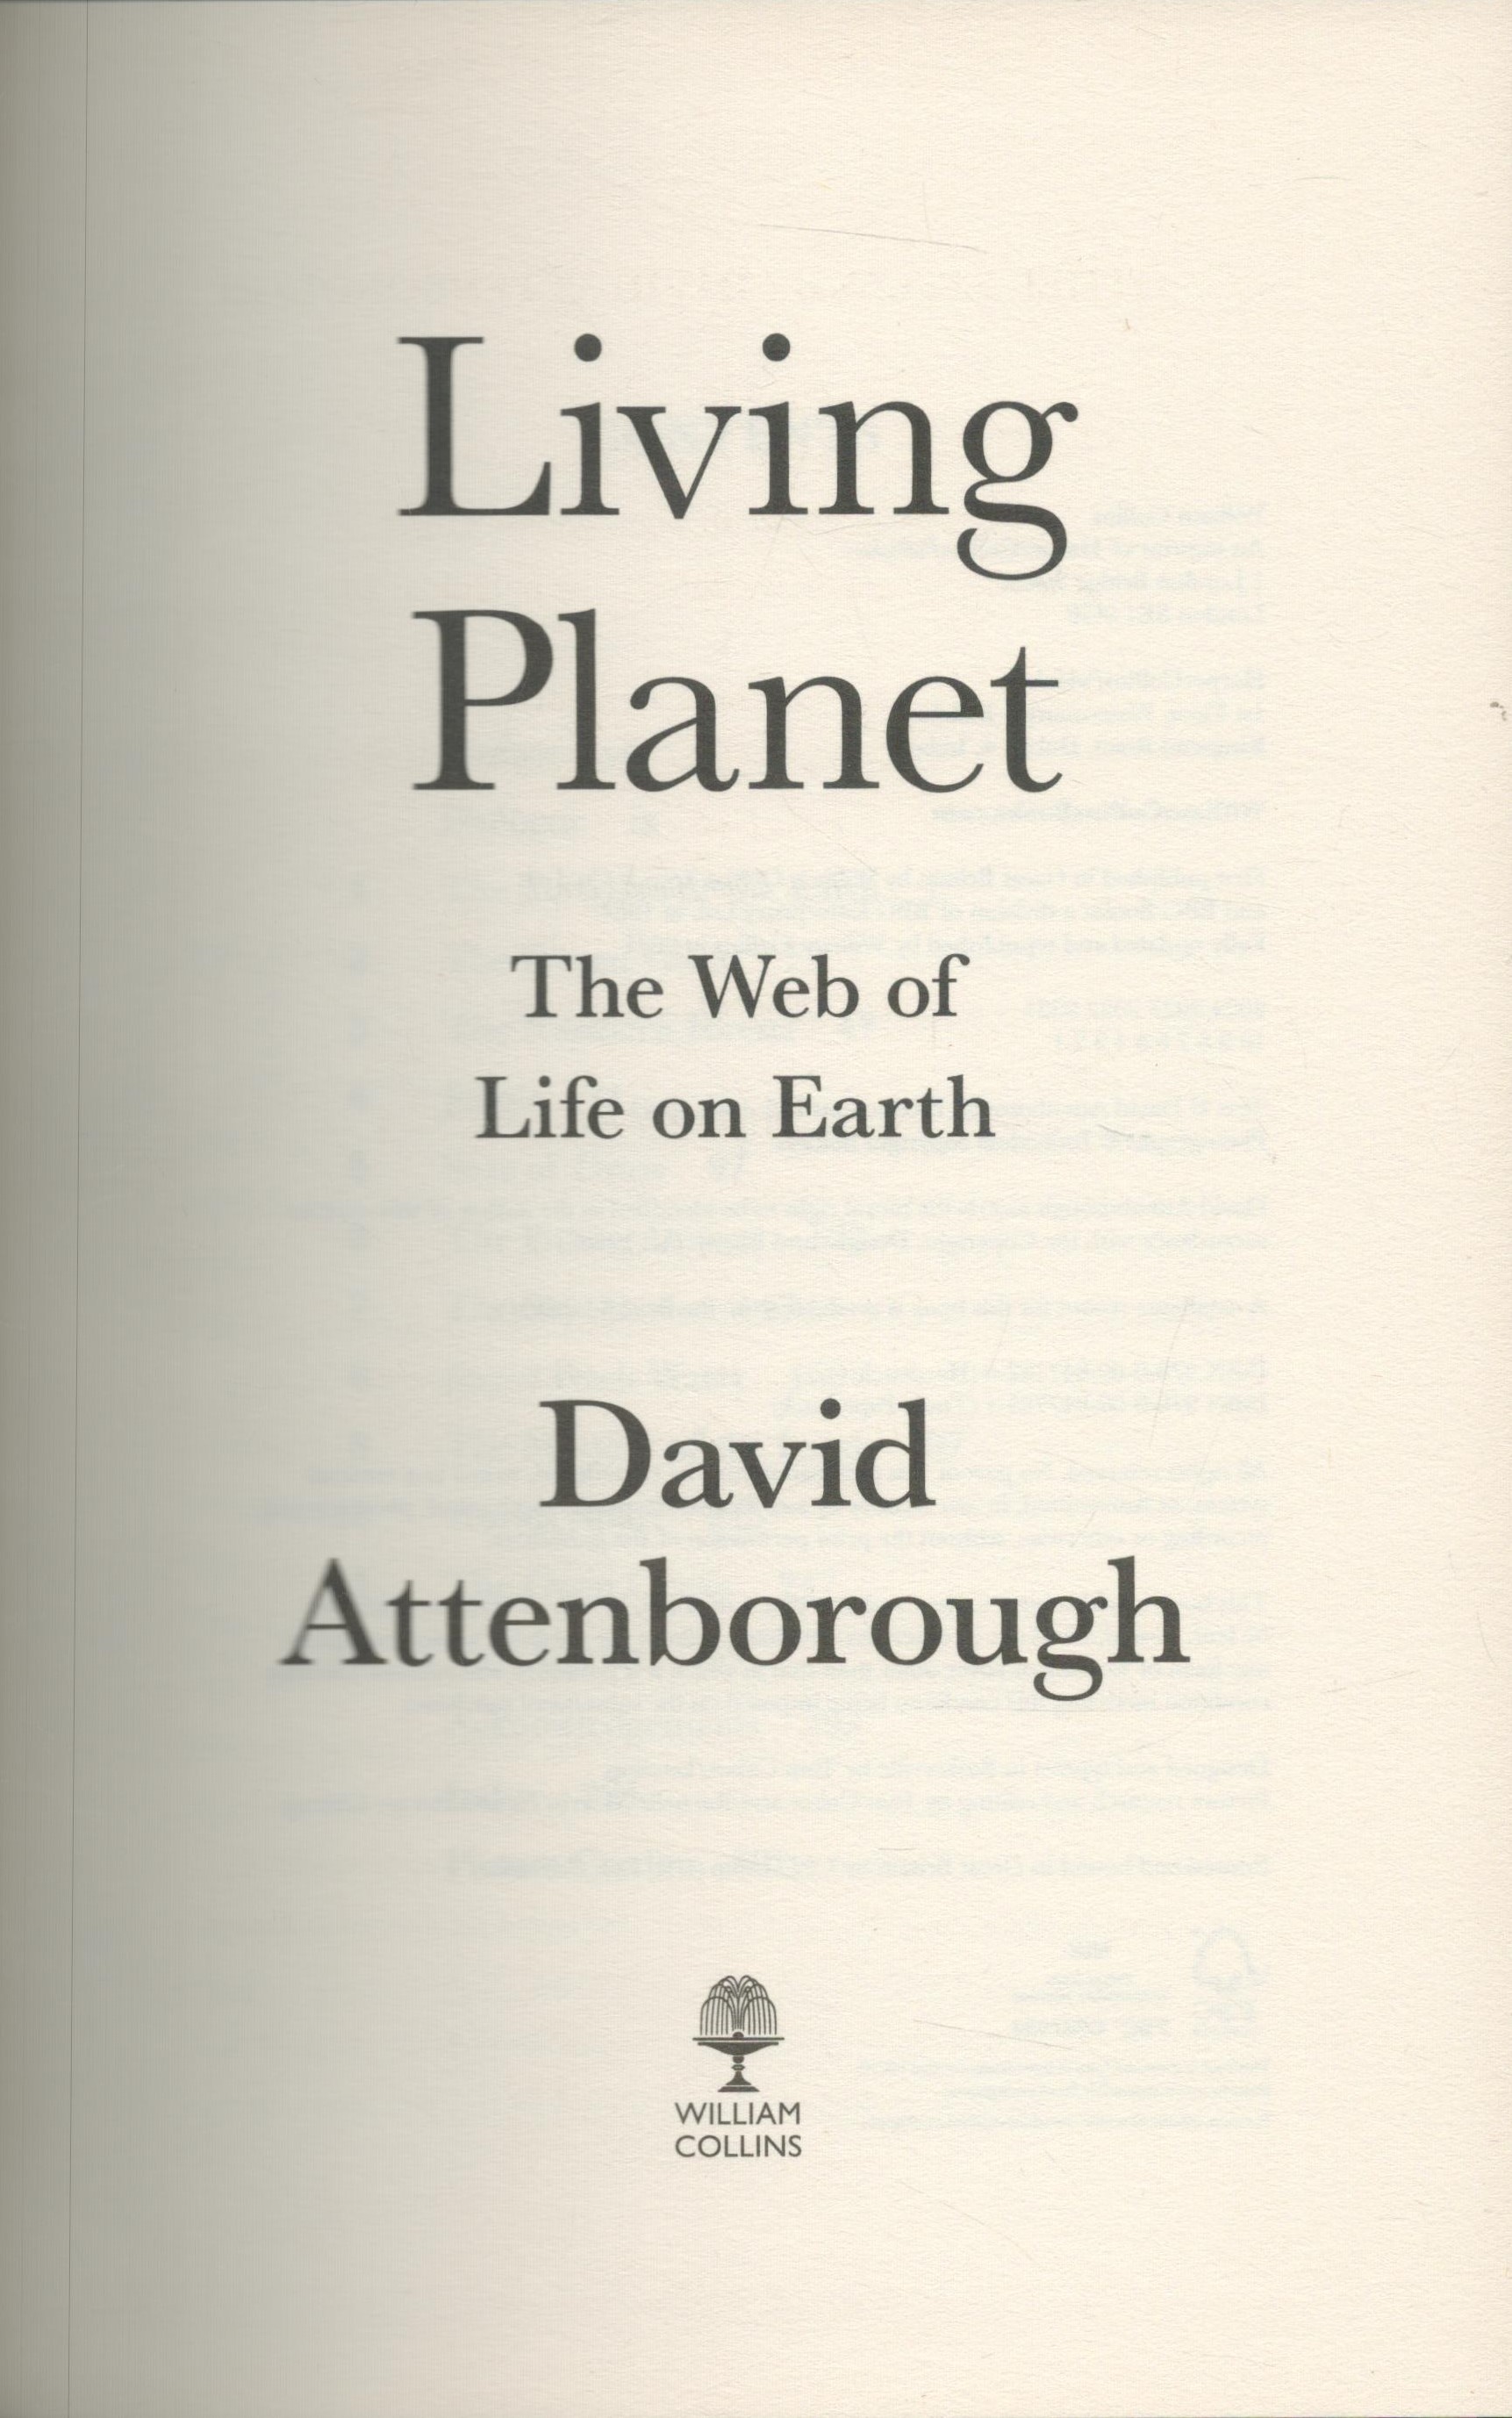 David Attenborough signed David Attenborough Living Planet The Web of Life on Earth first edition - Image 3 of 4